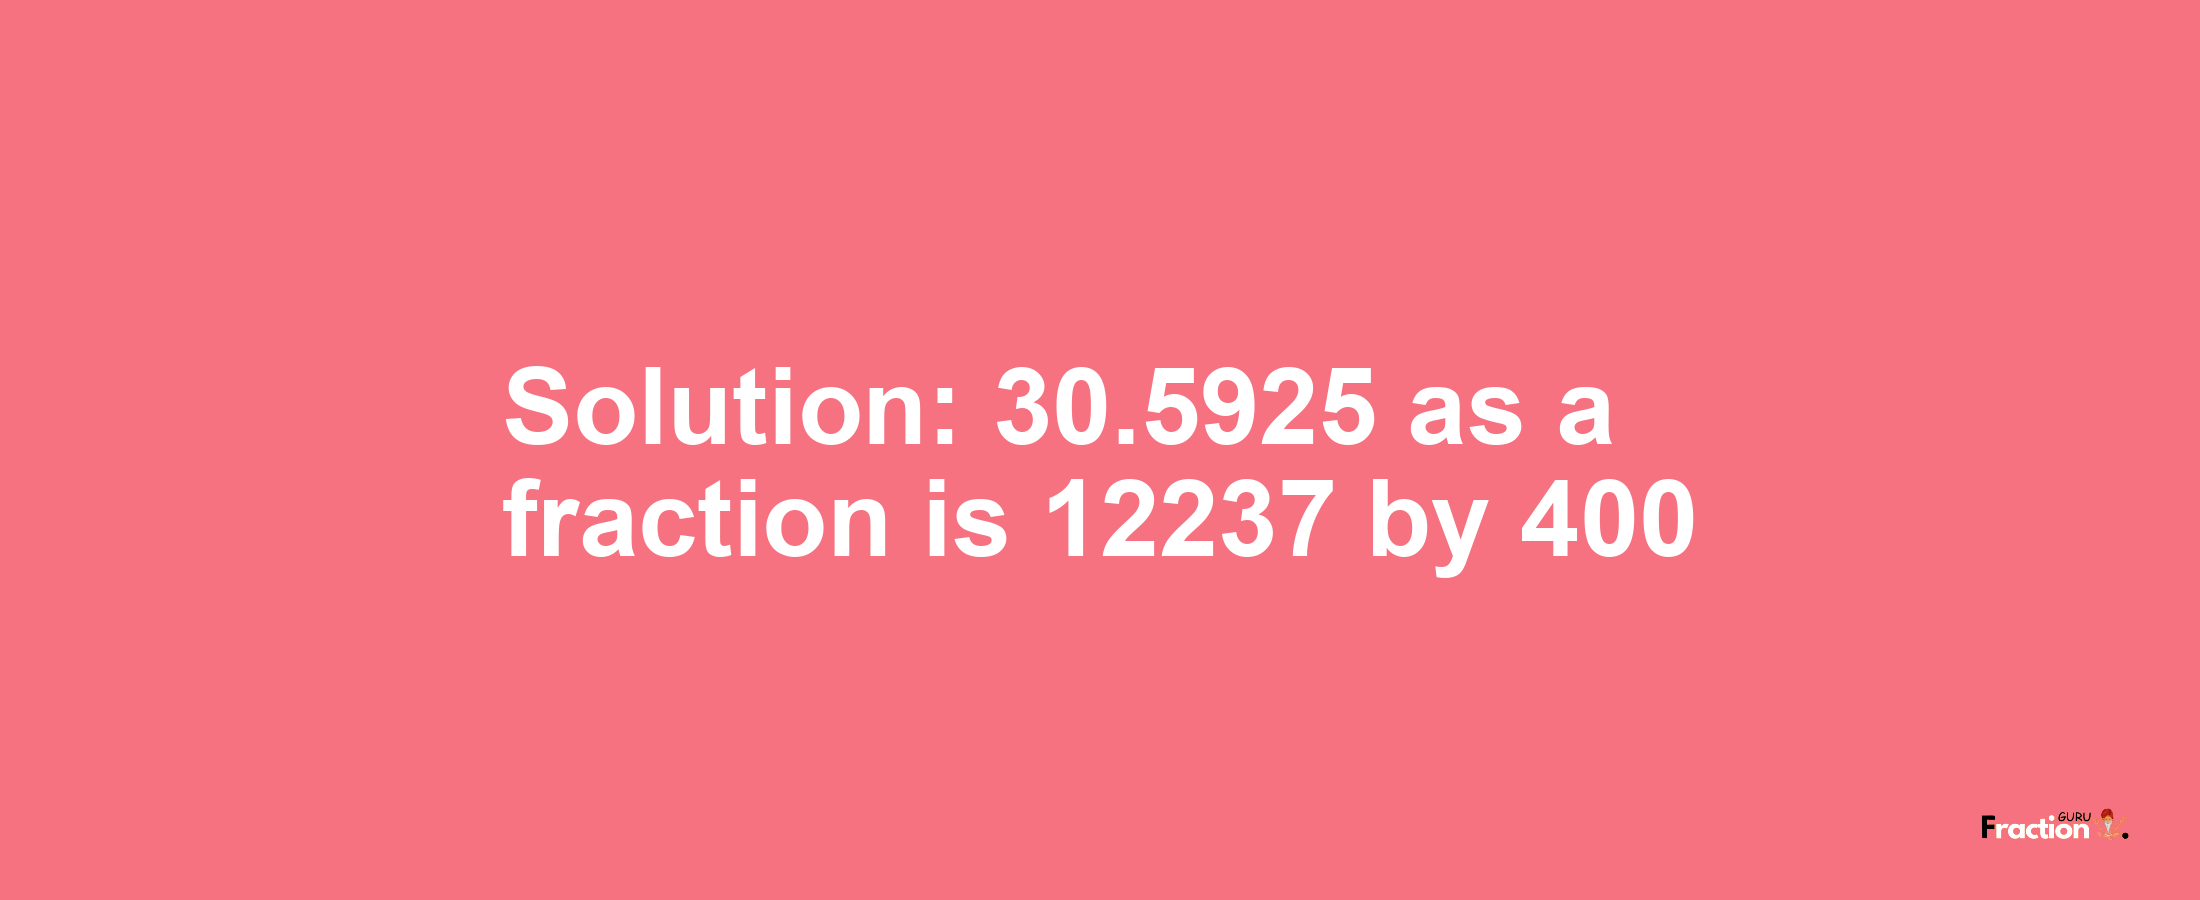 Solution:30.5925 as a fraction is 12237/400